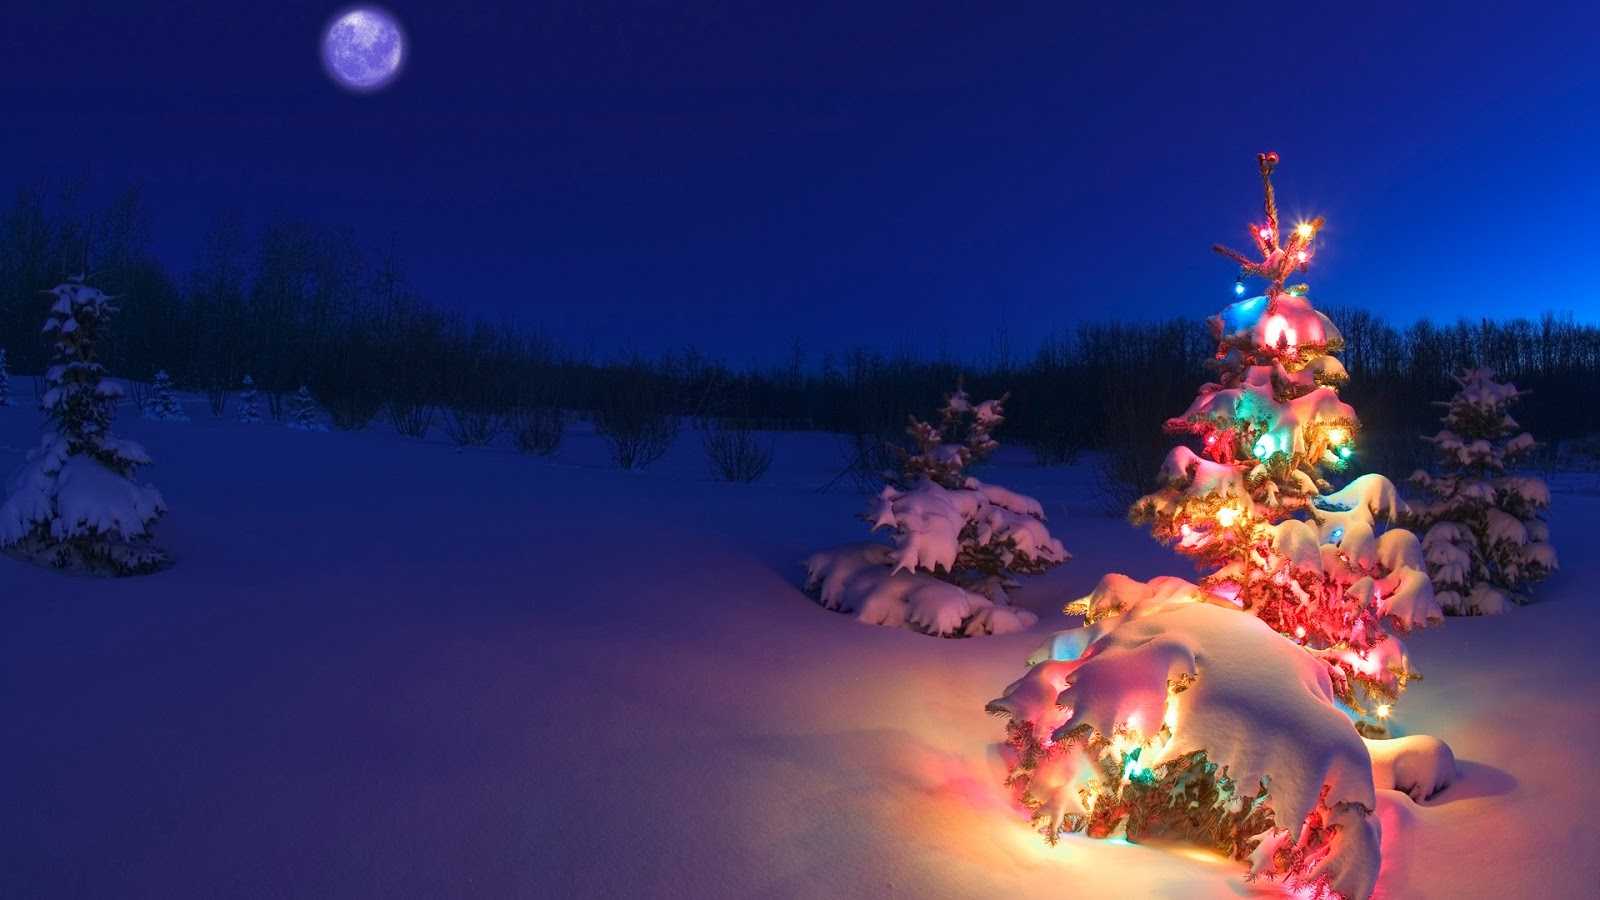 Light Covered Snowy Christmas Tree  High Definition High Resolution HD  Wallpapers  High Definition High Resolution HD Wallpapers